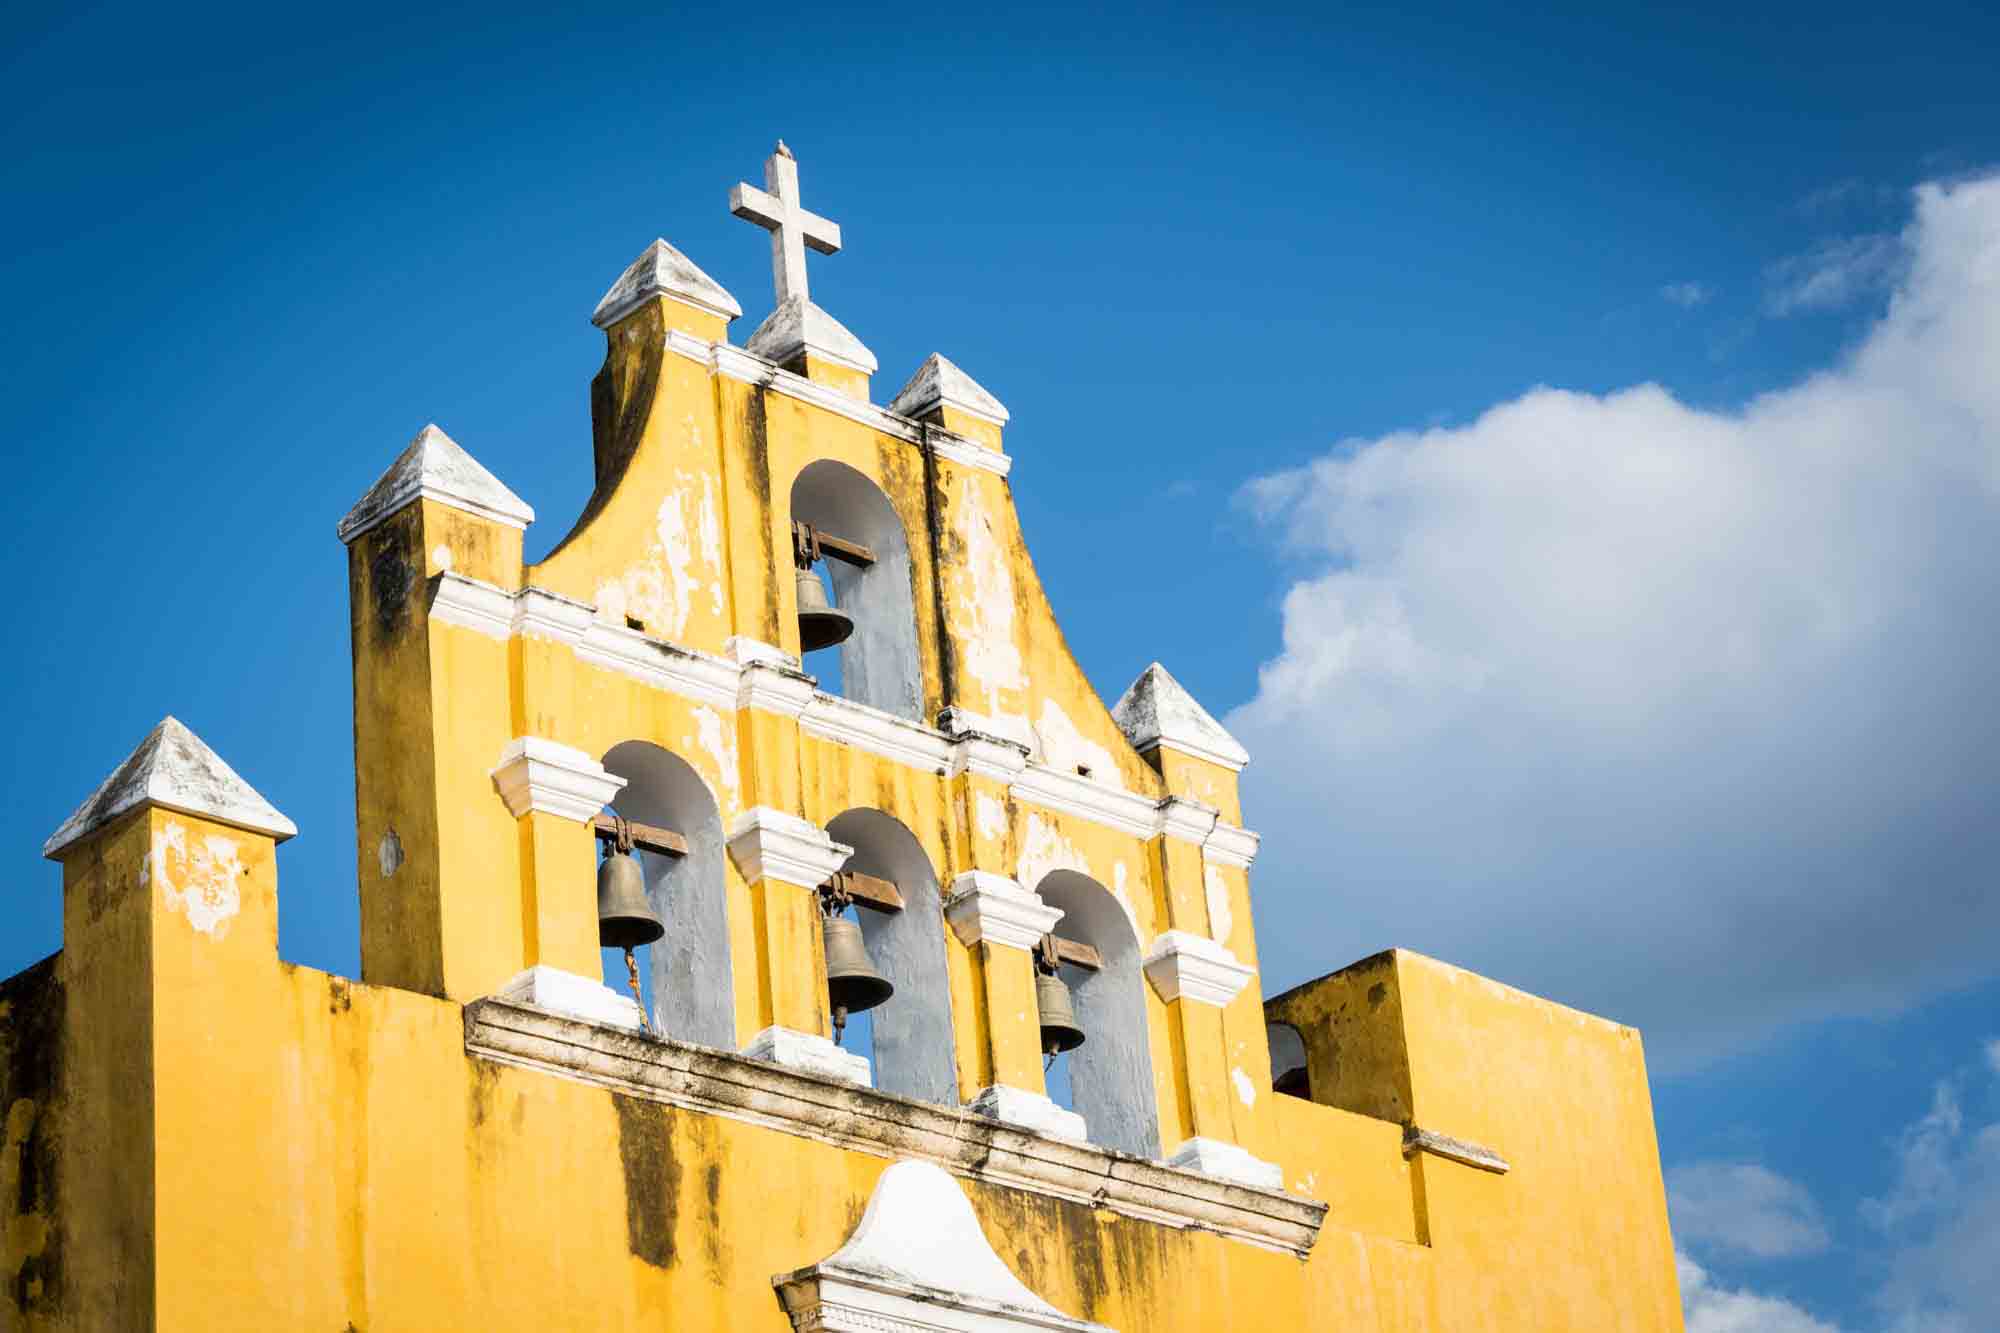 A church painted in yellow against a blue sky with clouds in Campeche